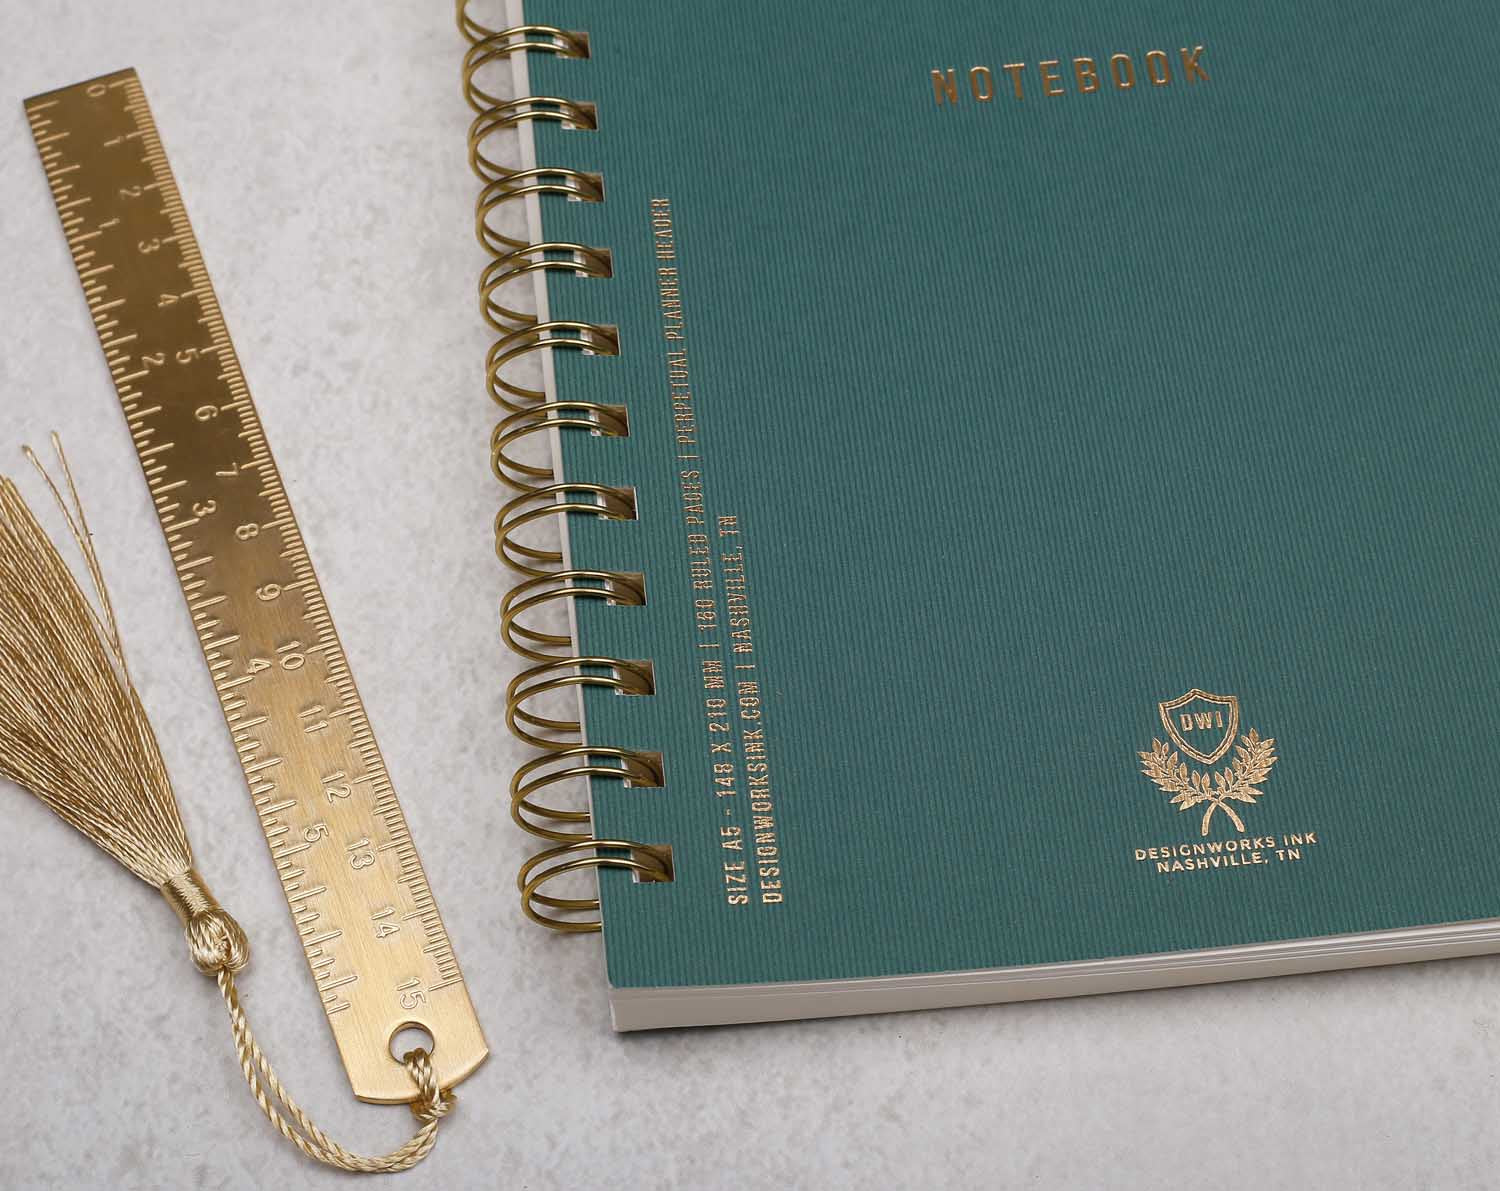 Teal & gold Ring Bound Notebook